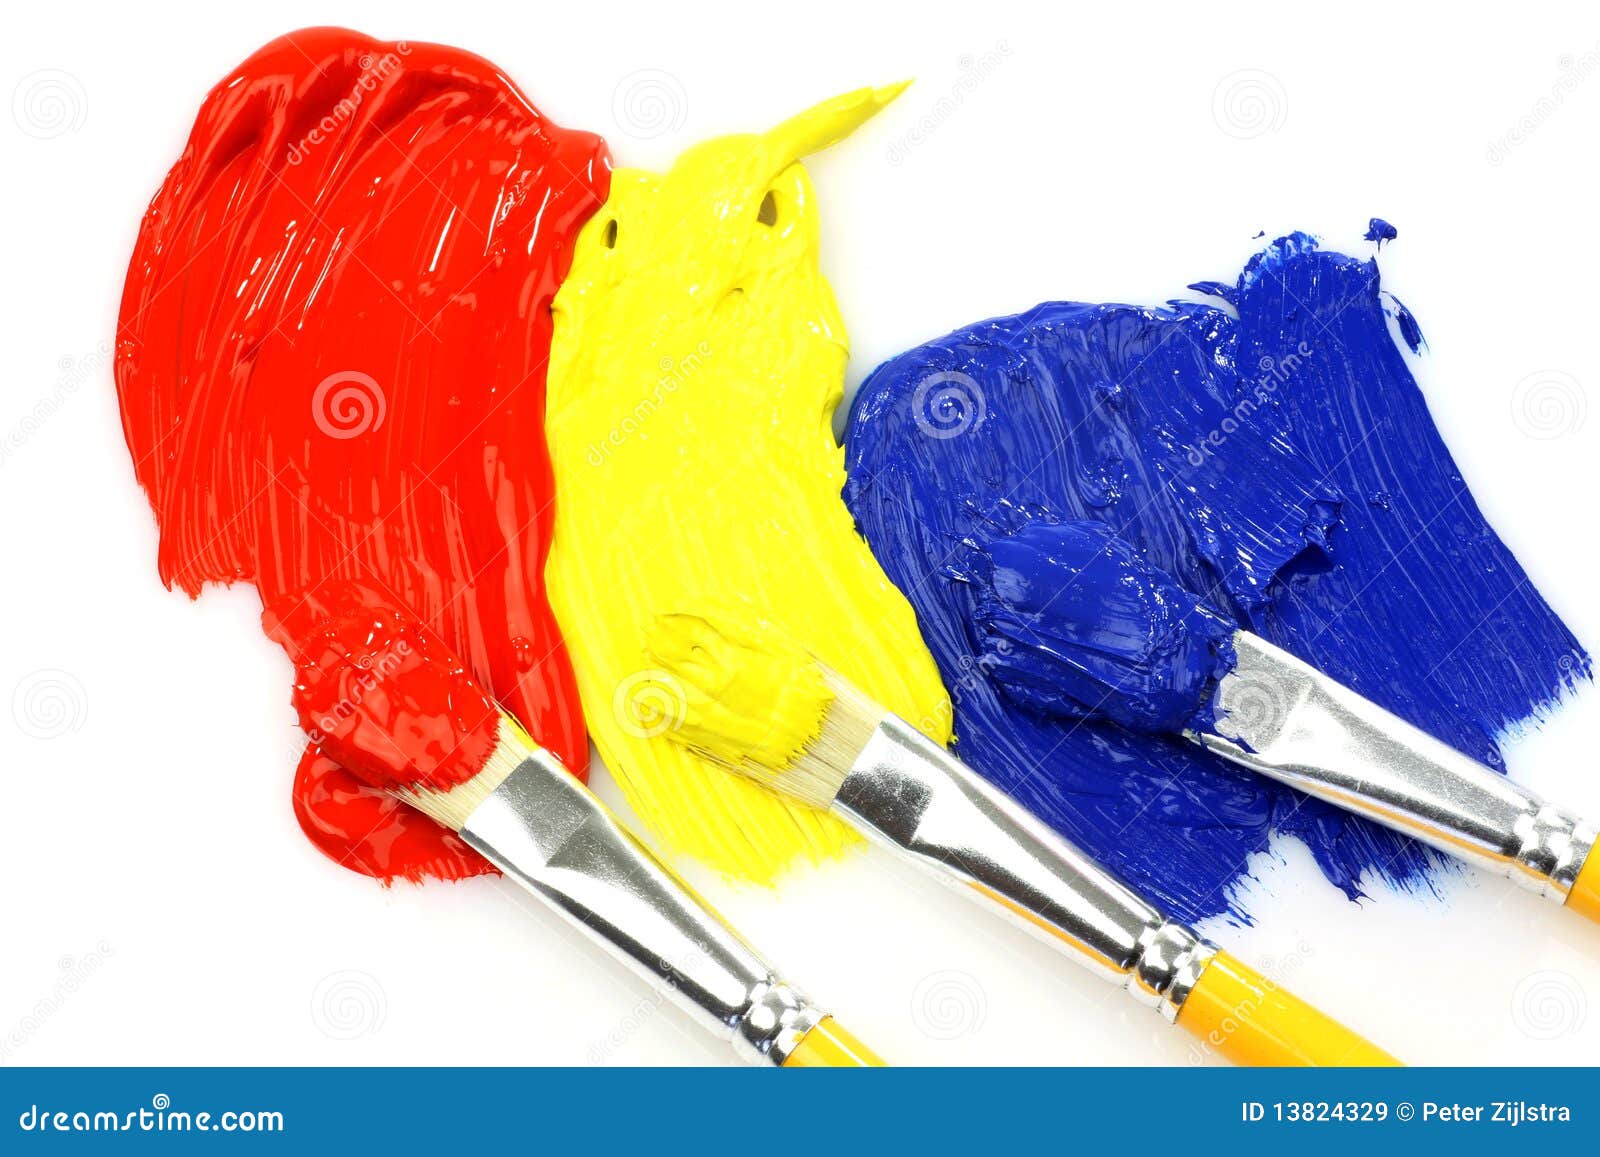 Acrylic Primary Color Stock Photo by ©airdone 103073170